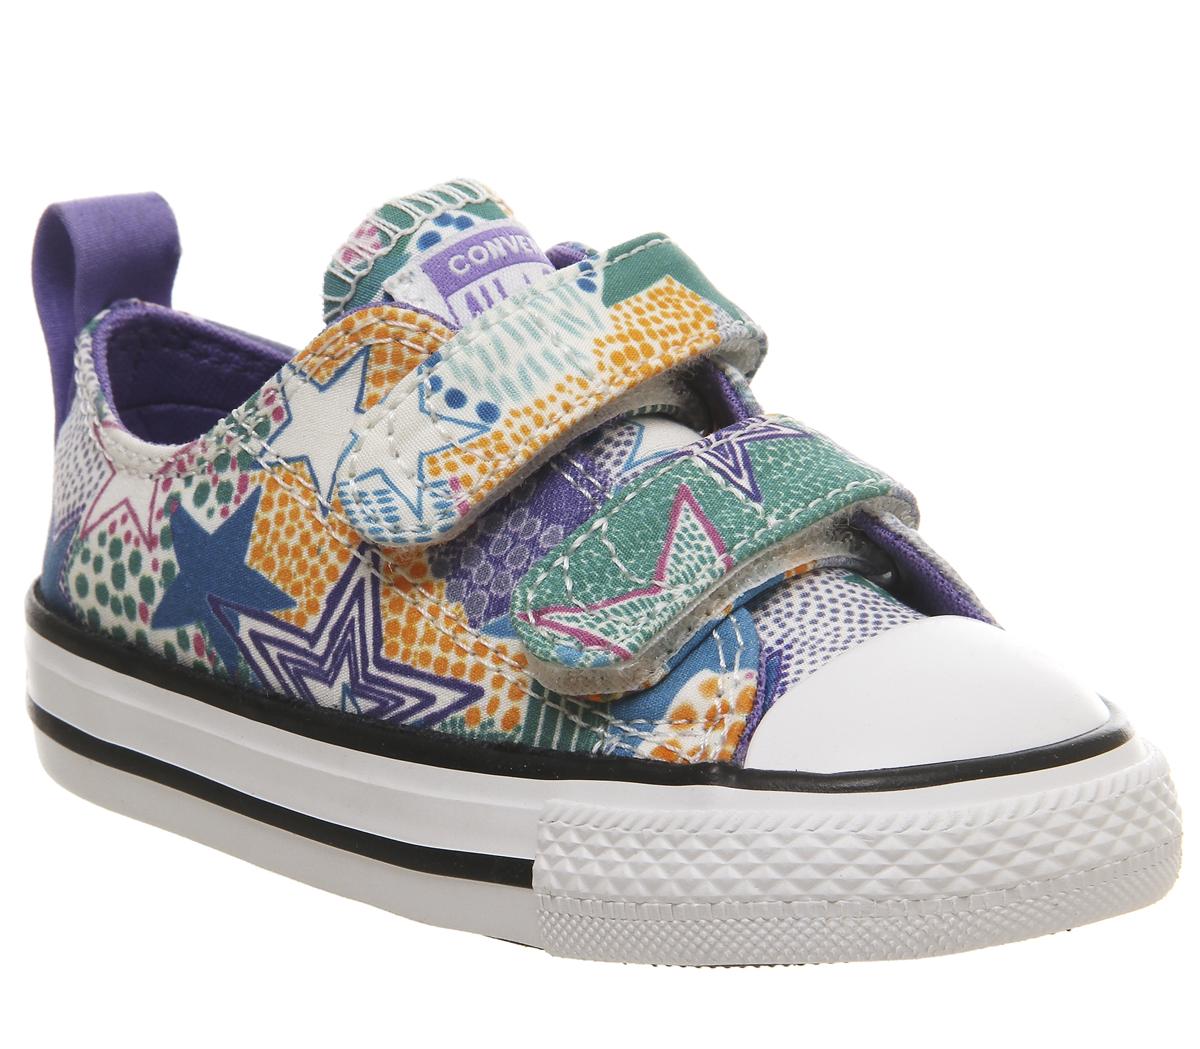 ConverseAll Star 2vlace TrainersWhite Wild Lilac Black